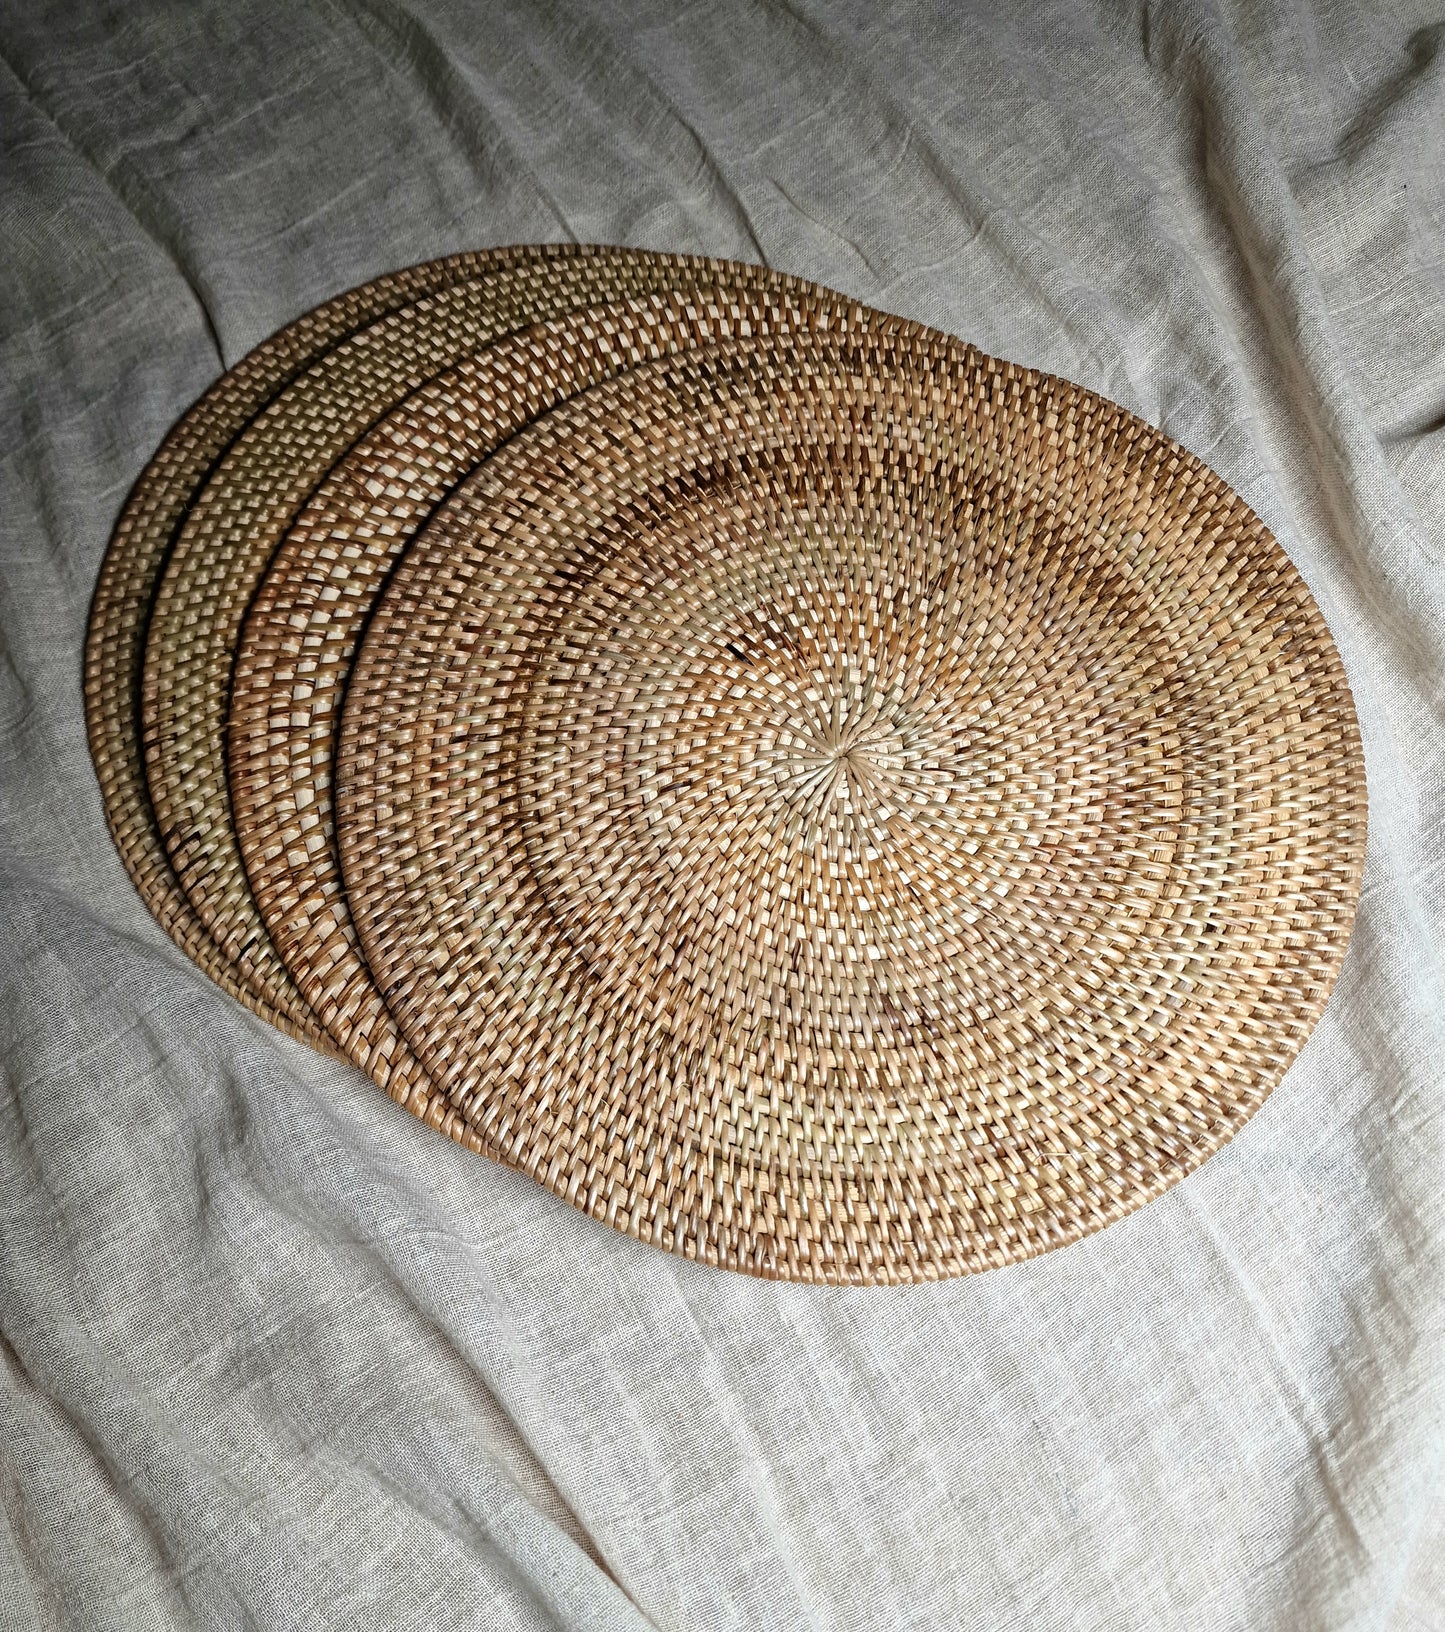 Rattan placemats